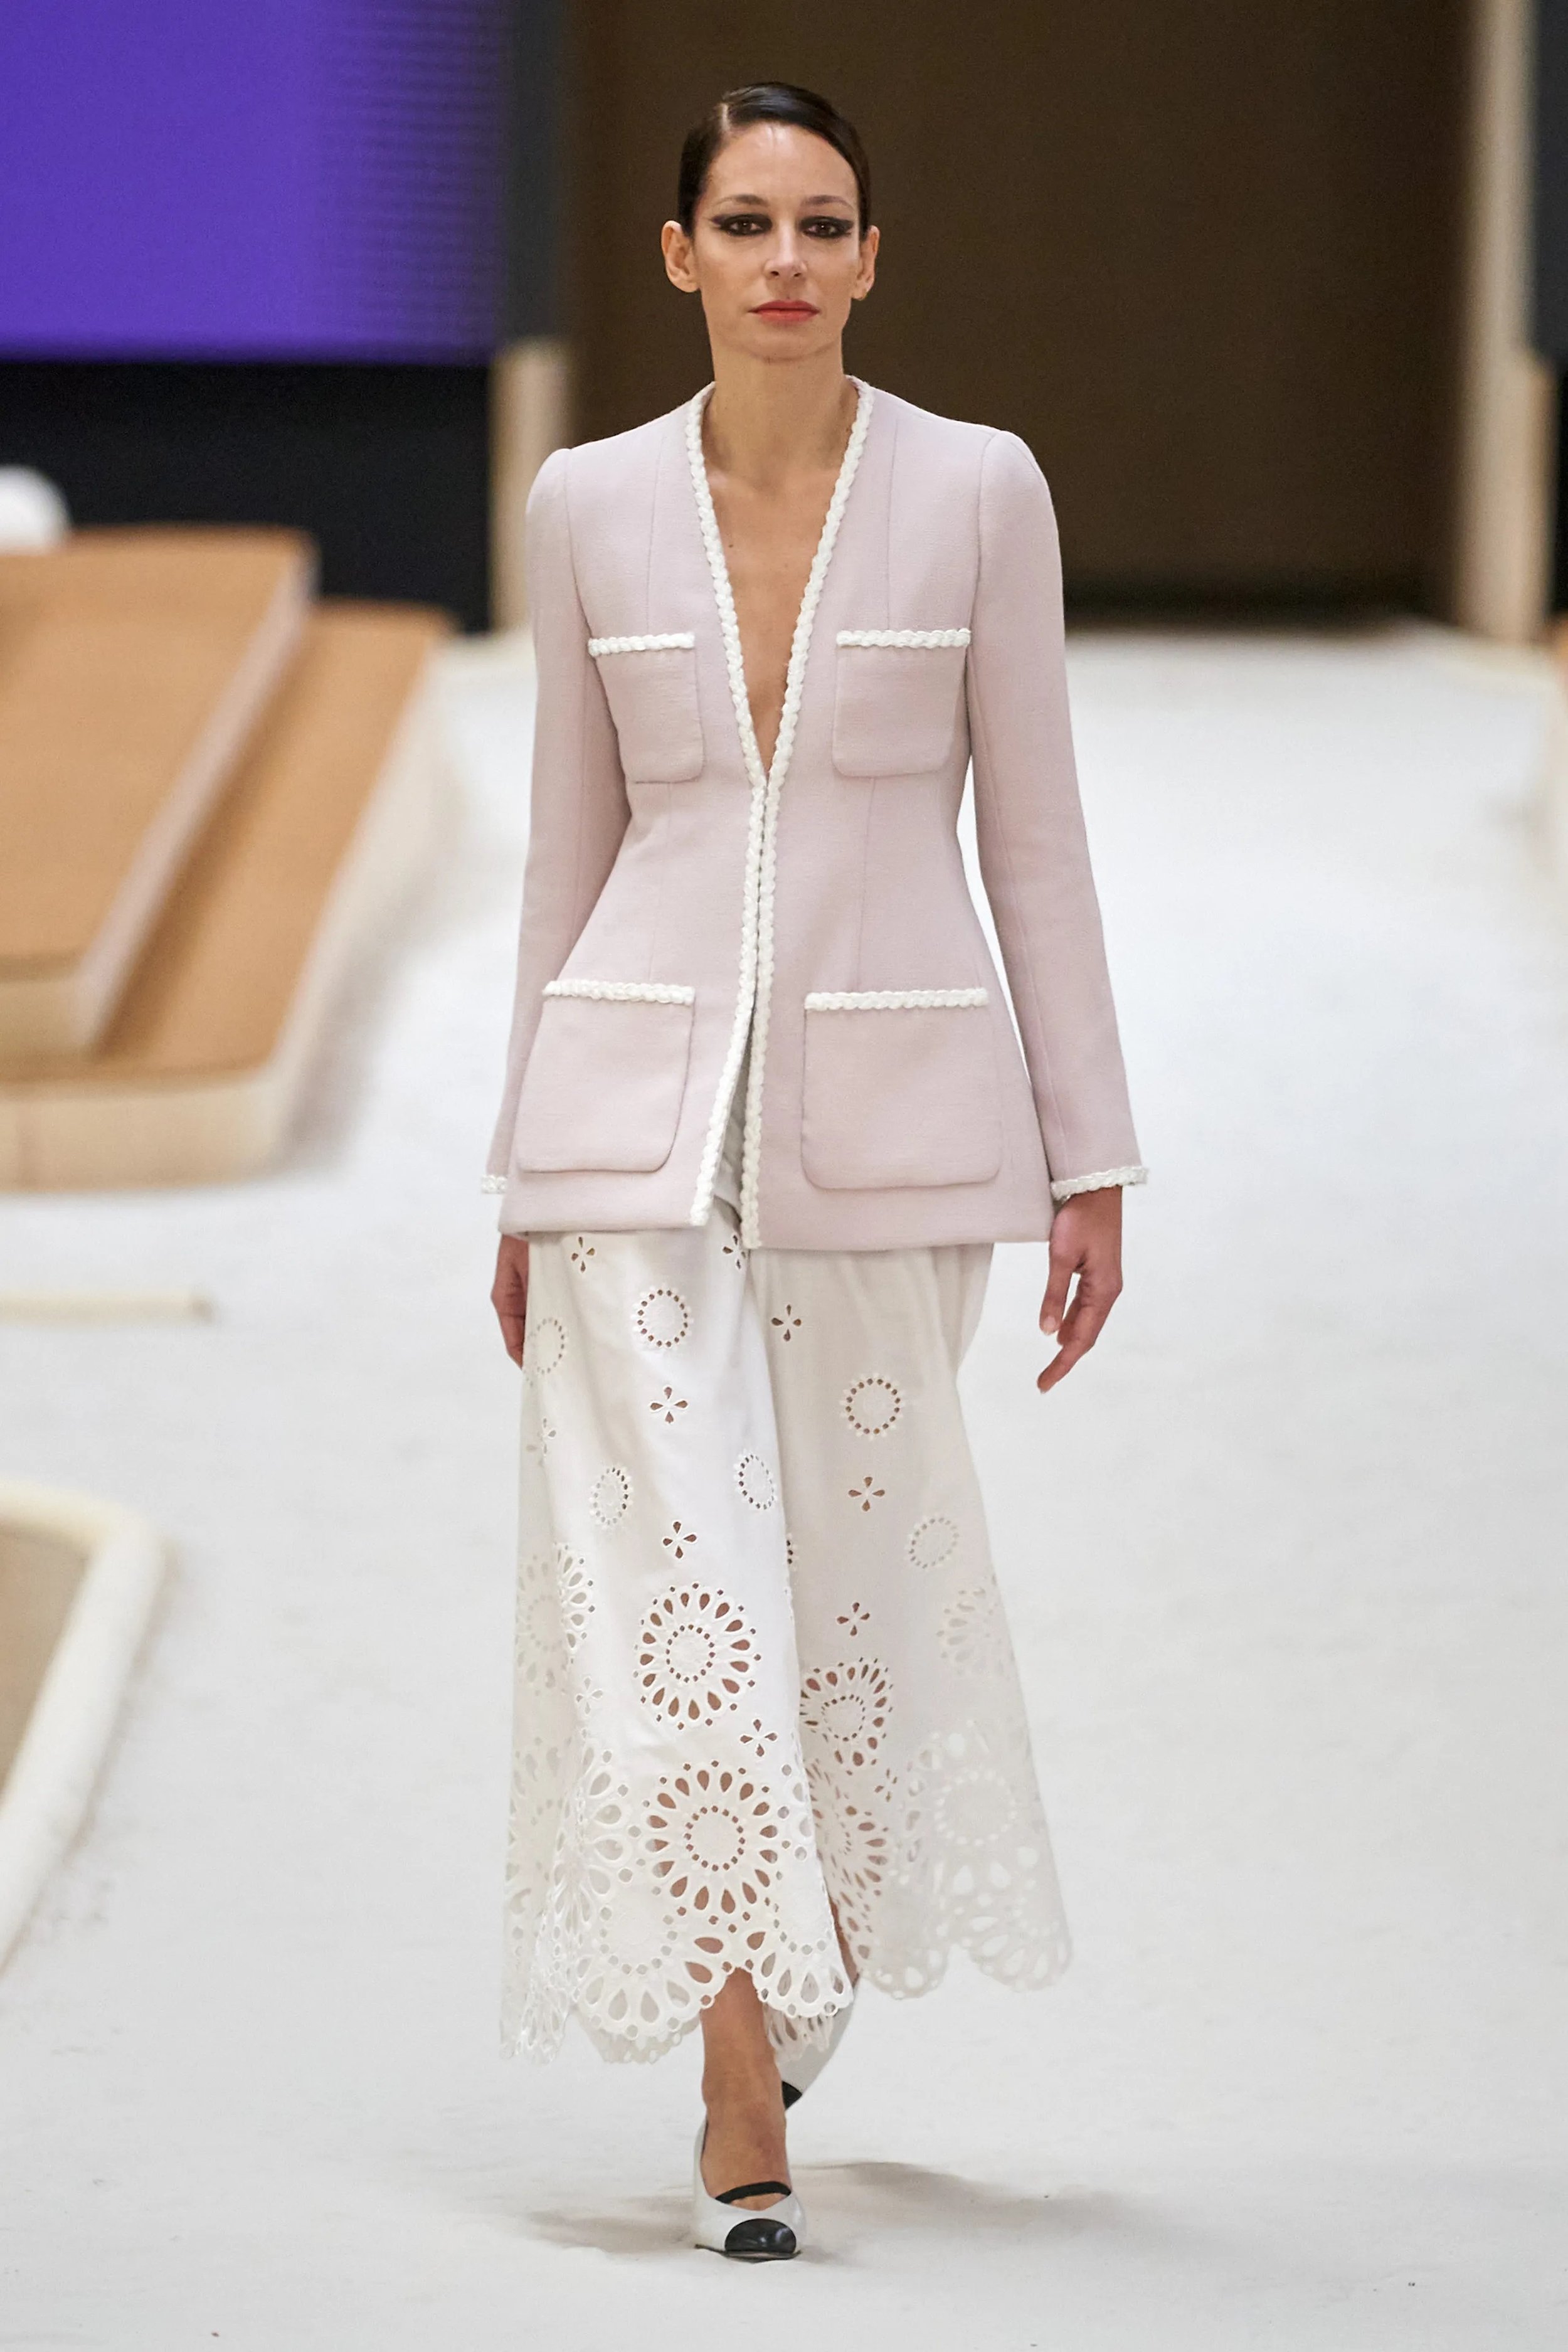 Chanel HC Broderie Anglaise White-Leg Trousers in White.jpg